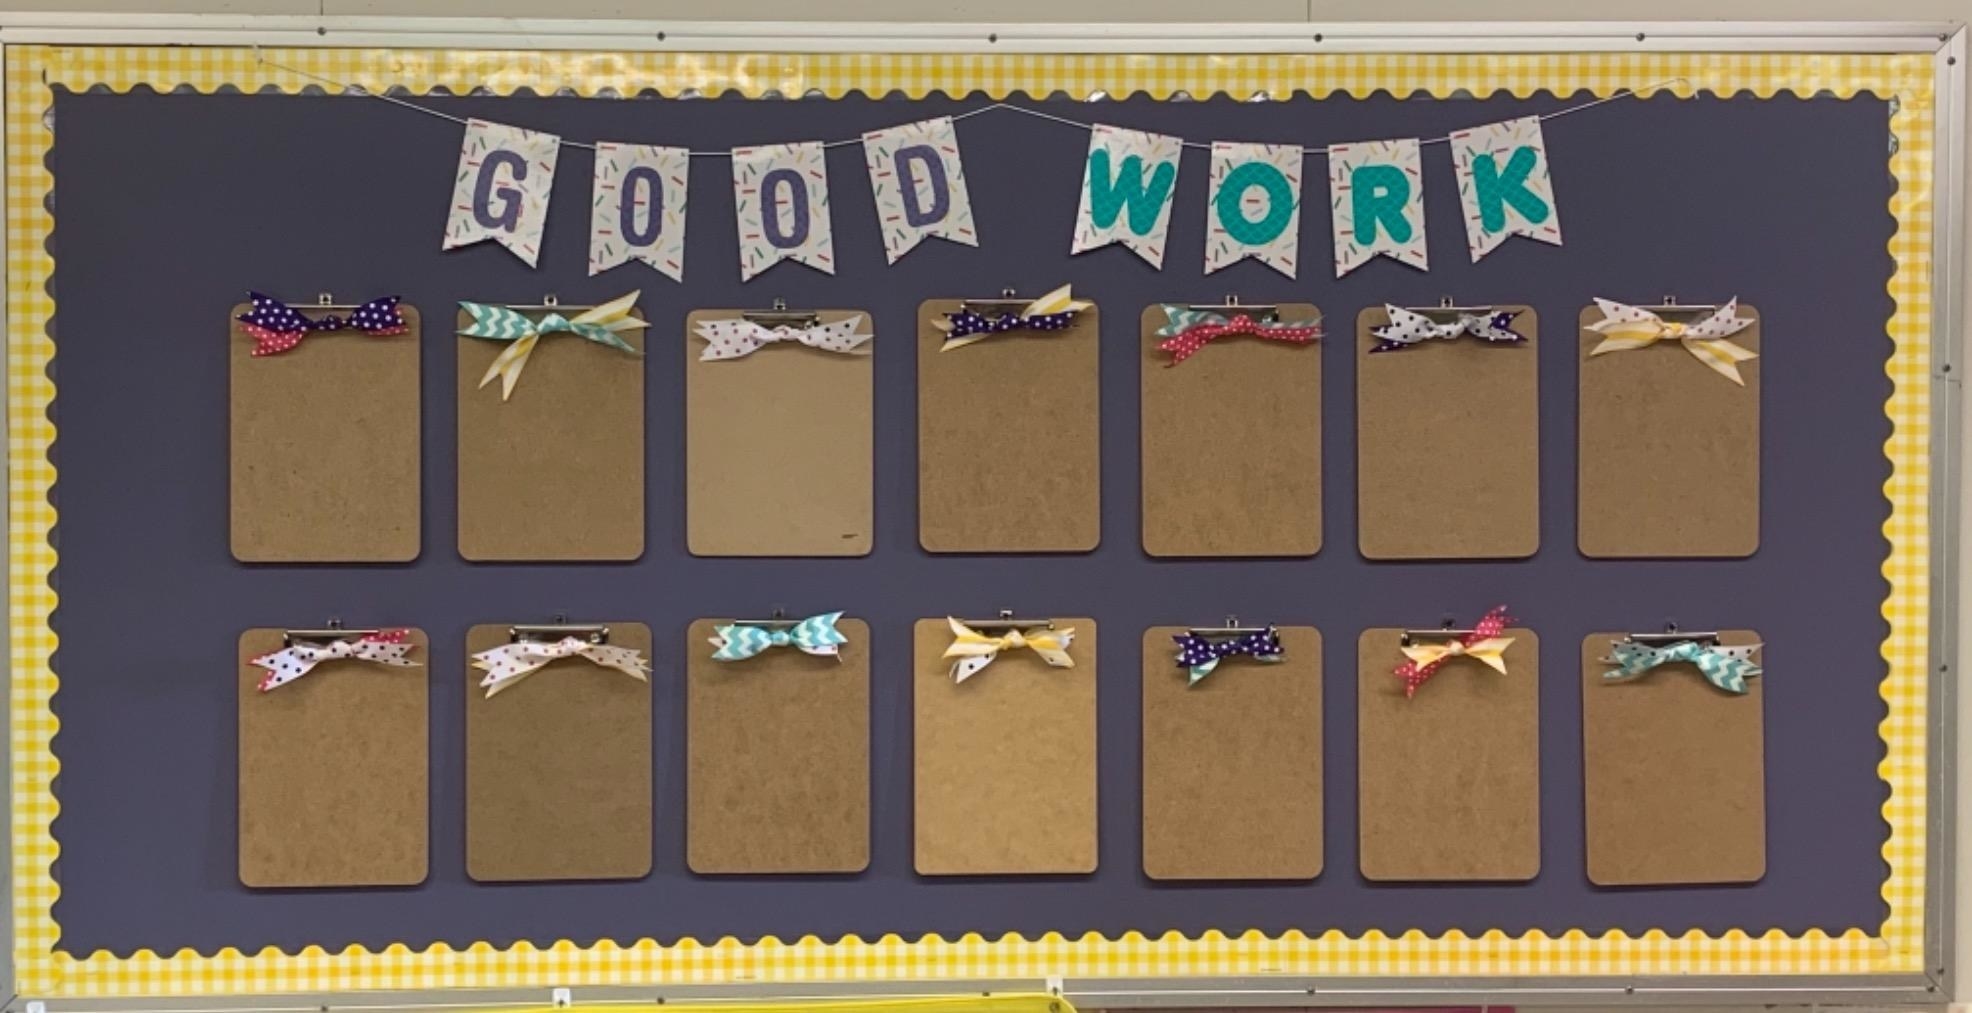 reviewer image of the clipboards mounted on a display wall with the banner, &quot;Good Work&quot;